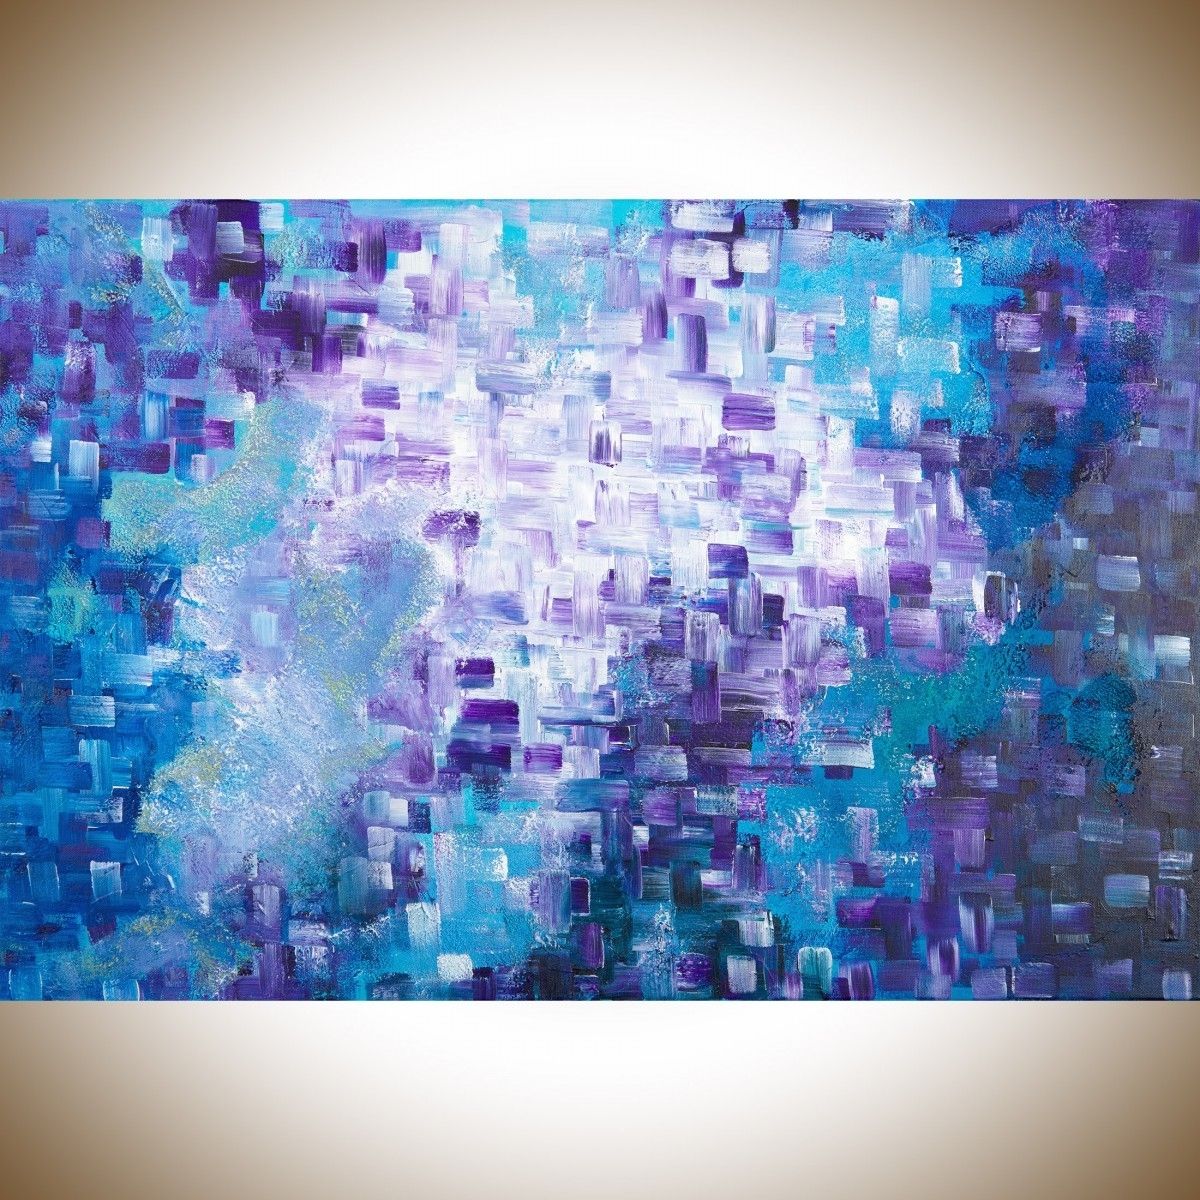 Blue Canvas Abstract Wall Art Throughout Most Current Dissolvingqiqigallery 36"x24" Stretched Canvas Original Large (View 5 of 15)